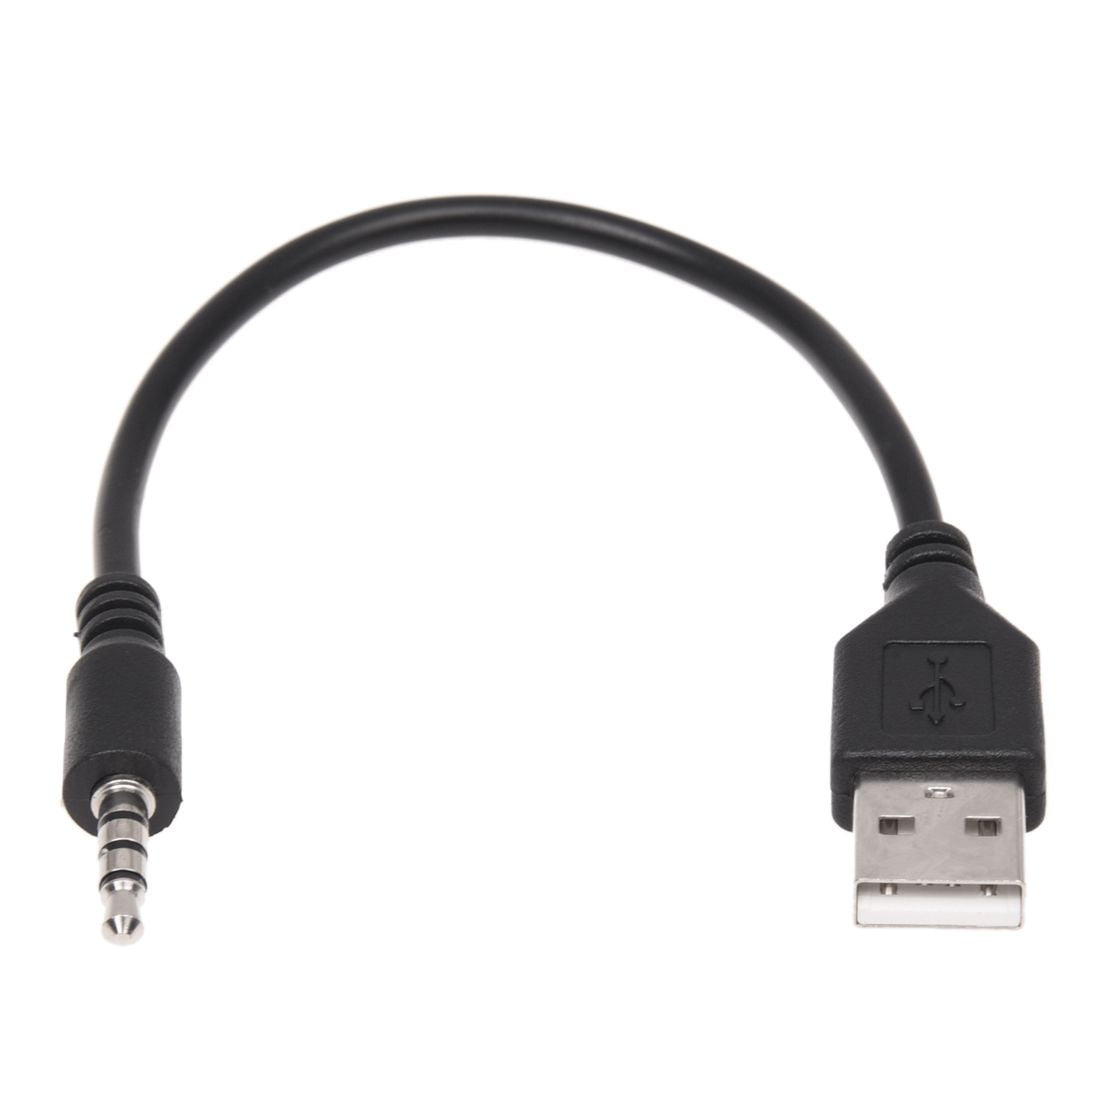 3.5mm AUX Audio Plug Jack to USB 2.0 Male Charge Cable Adapter Cord Car iPod MP3 